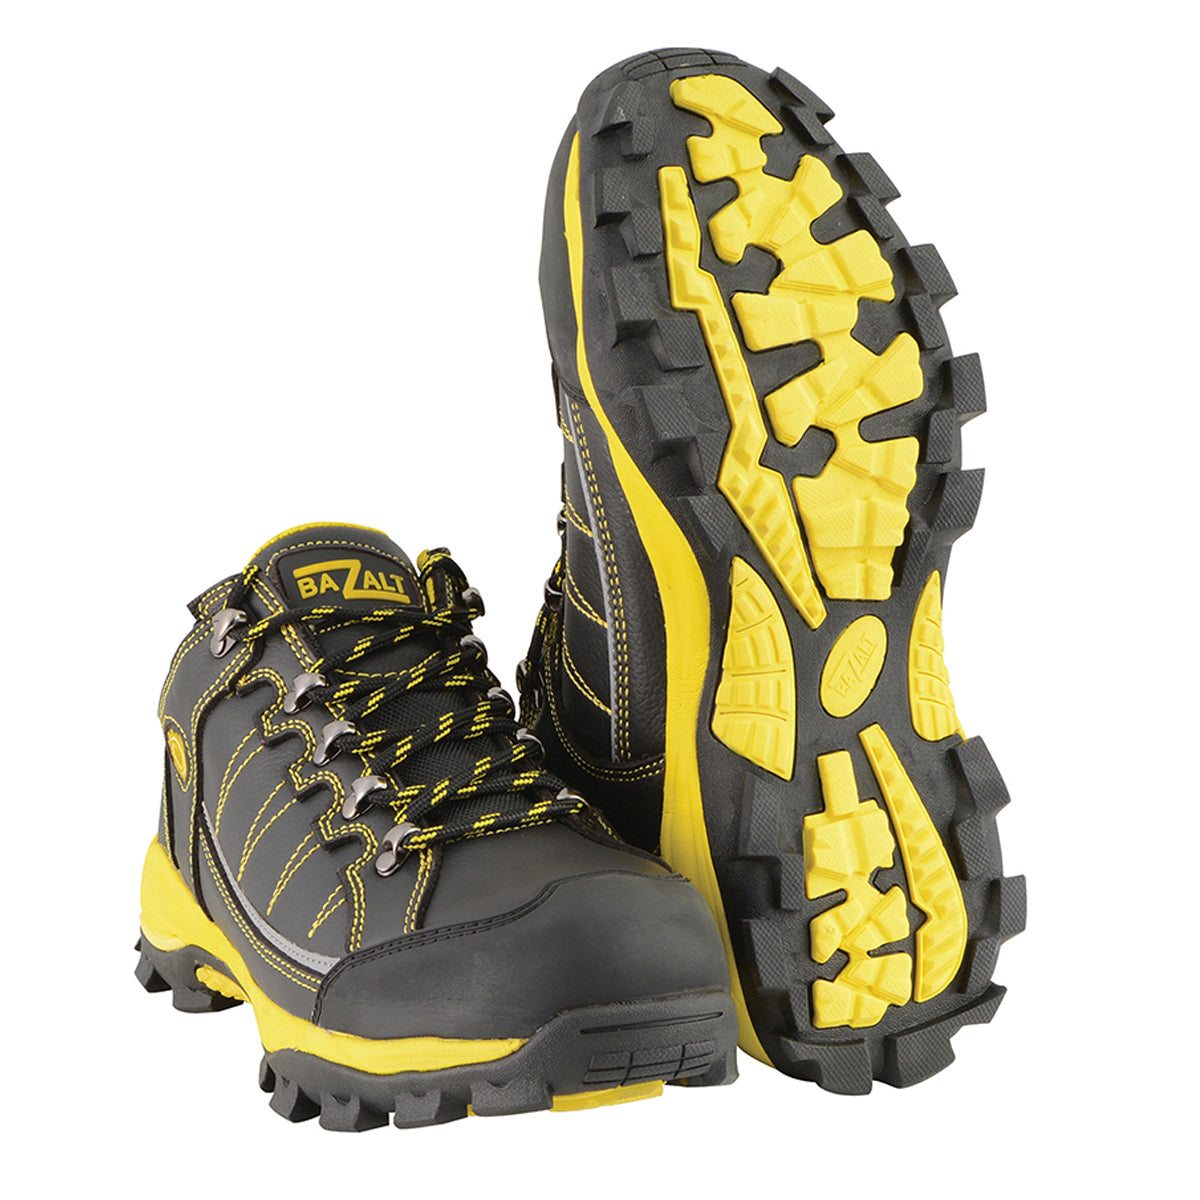 Men’s Black & Yellow Water & Frost Proof Leather Shoe w/ Composite Toe